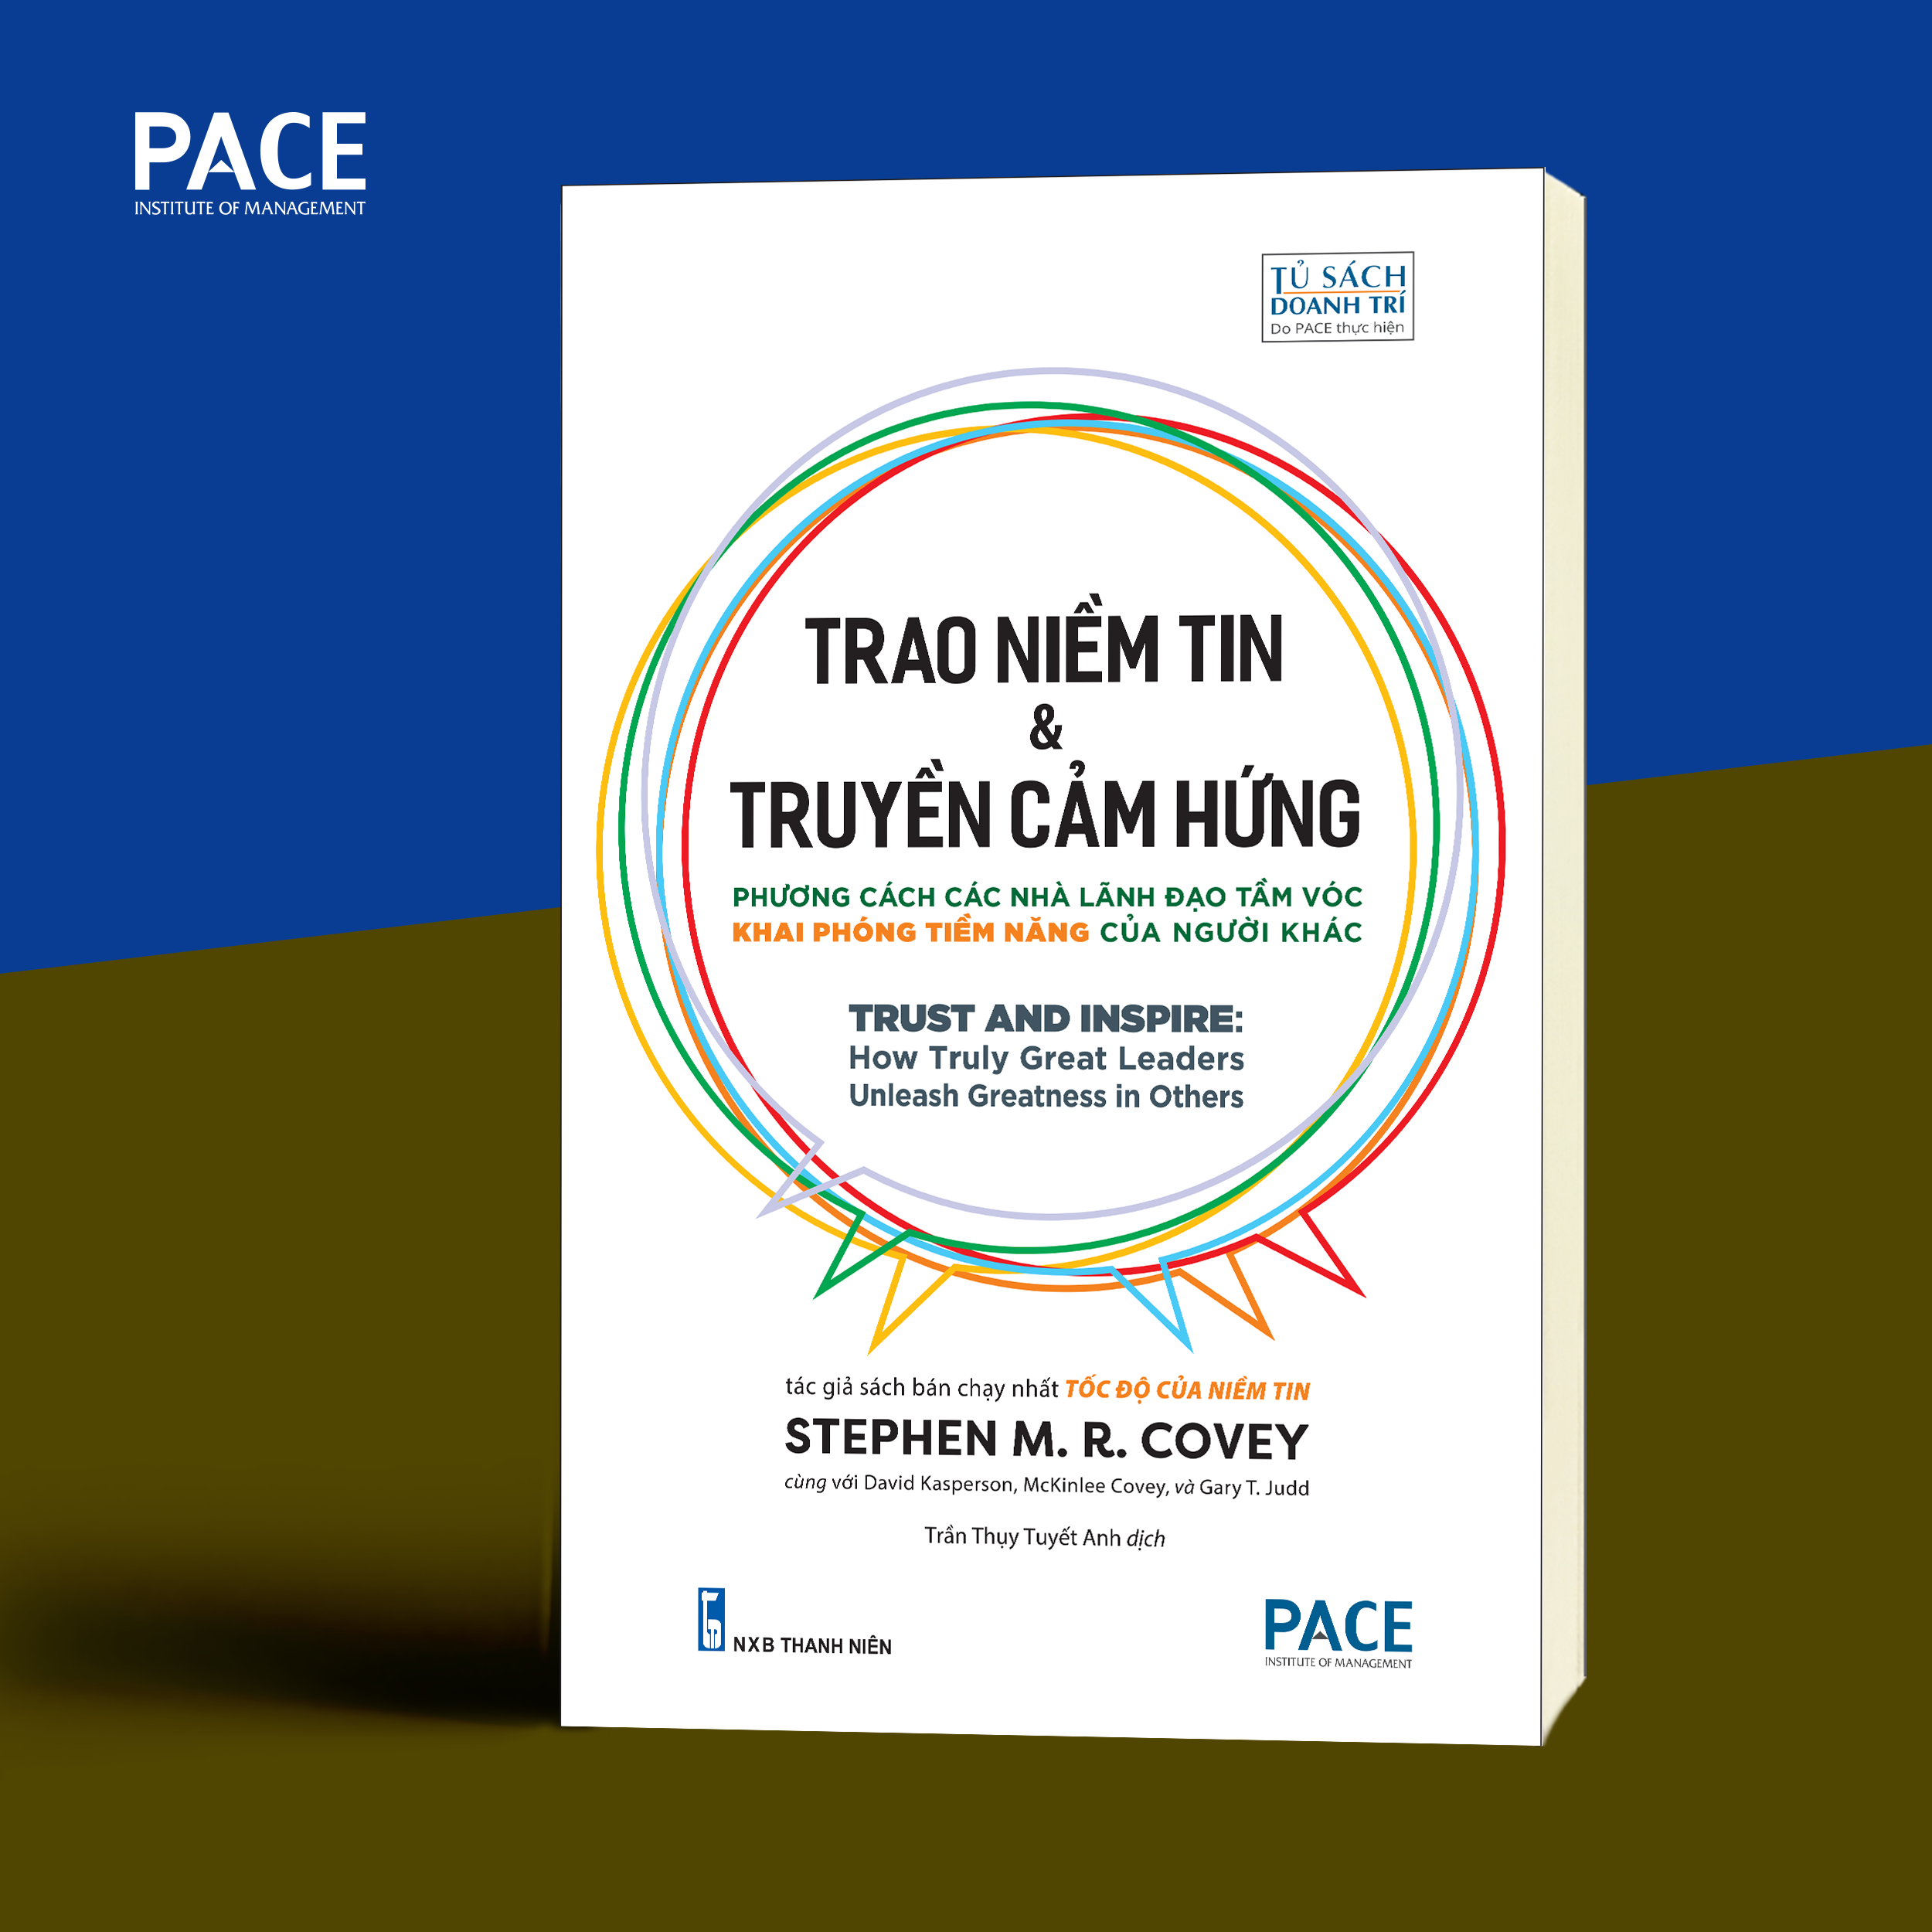 Trao Niềm Tin & Truyền Cảm Hứng (Trust and Inspire) - Stephen M. R. Covey - PACE Books